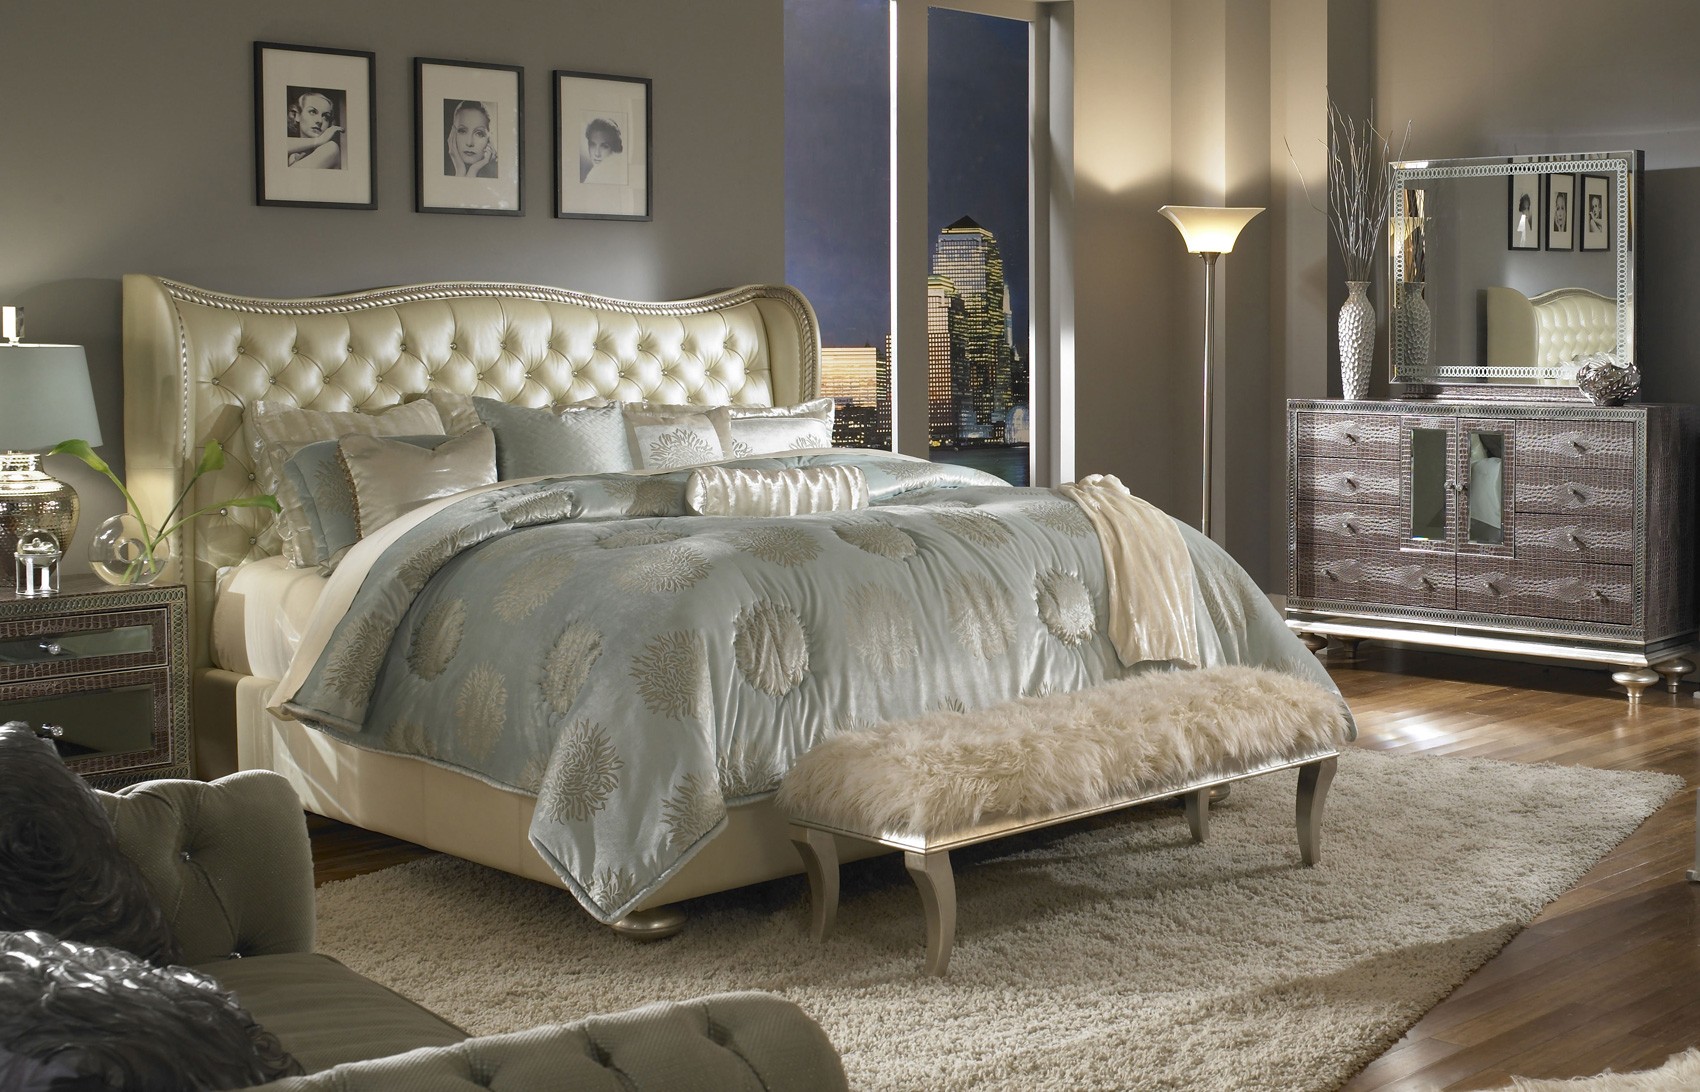 Awesome Tufted Wing Curved Headboard King Size Bed Escorted By Vanity Mirrored Bedroom Furniture In Small Space Grey Master Bedroom Styles Classic And Elegant Mirrored Bedroom Furniture Furniture + Accessories